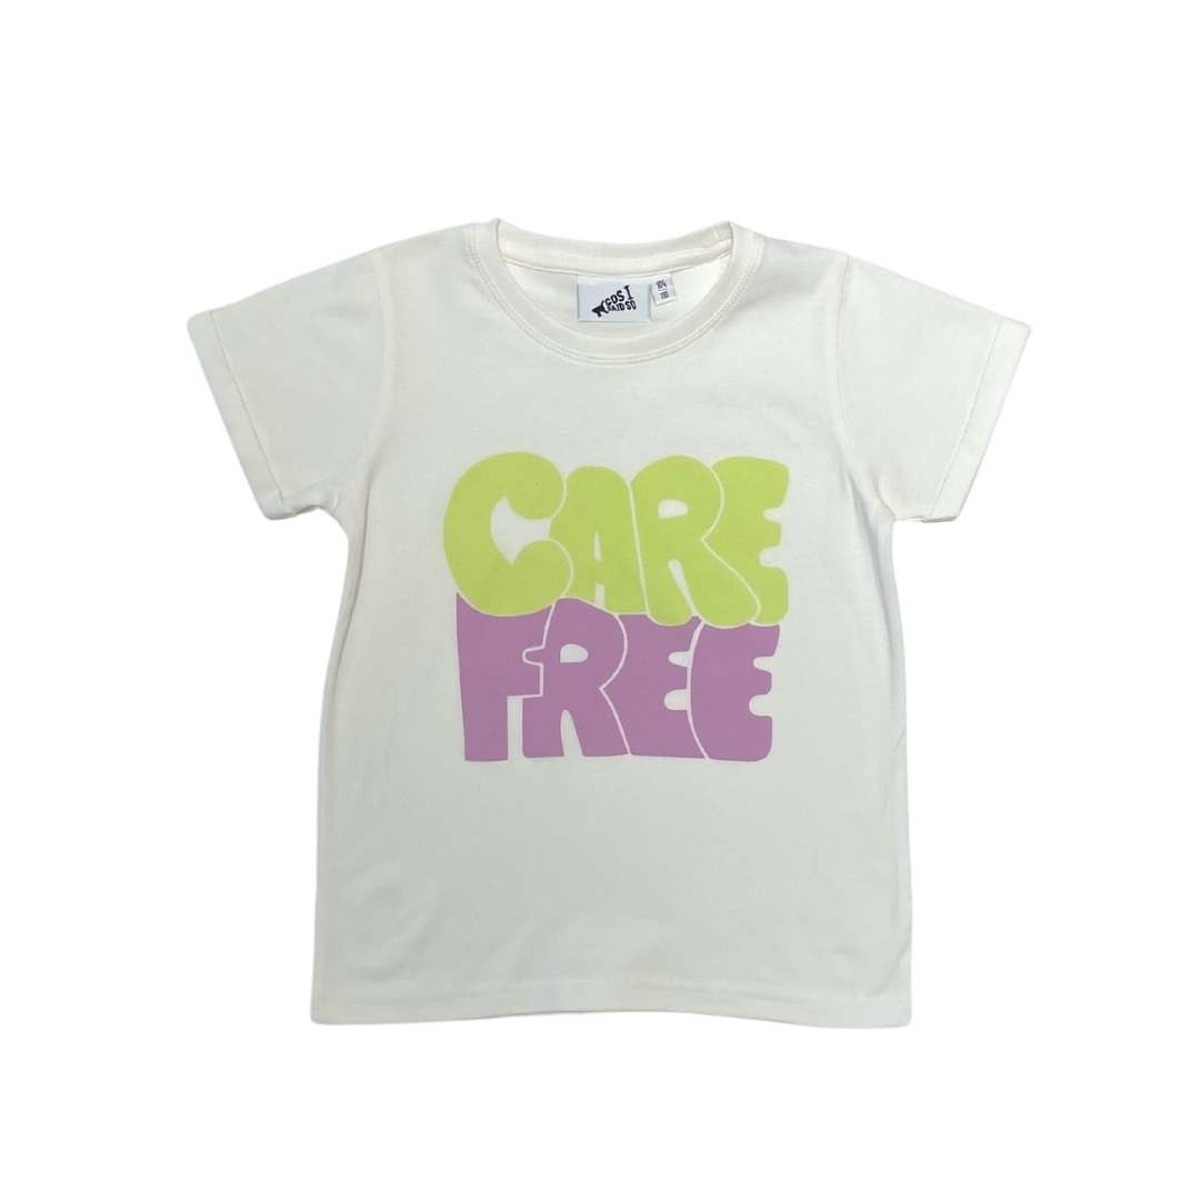 CARE FREE T-SHIRT / OFFWHITE